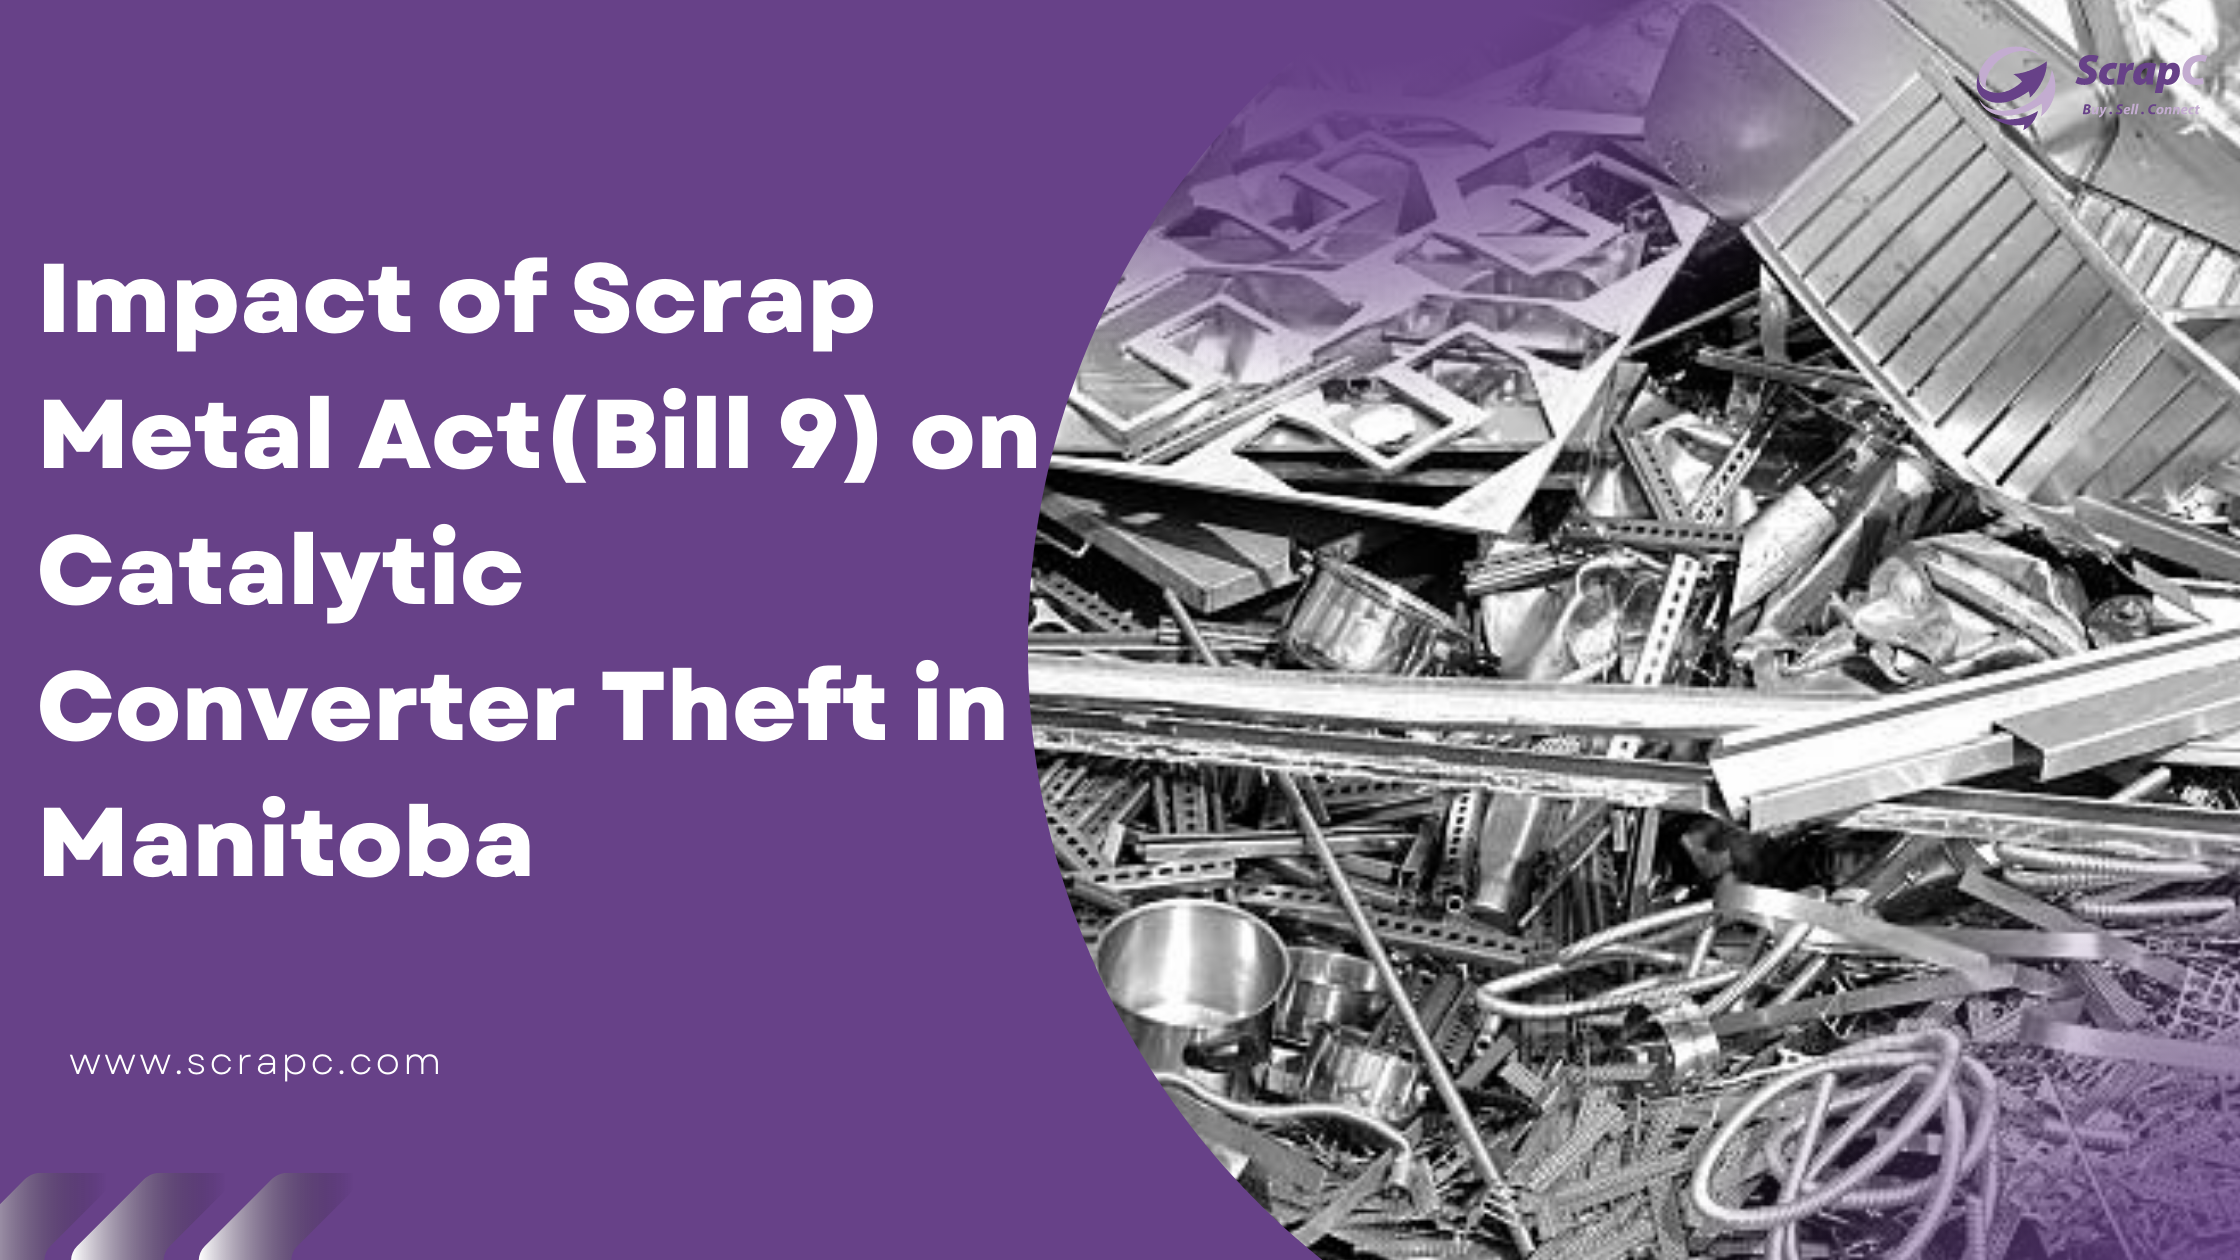 Impact of Scrap Metal Act(Bill 9) on Catalytic Converter Theft in Manitoba